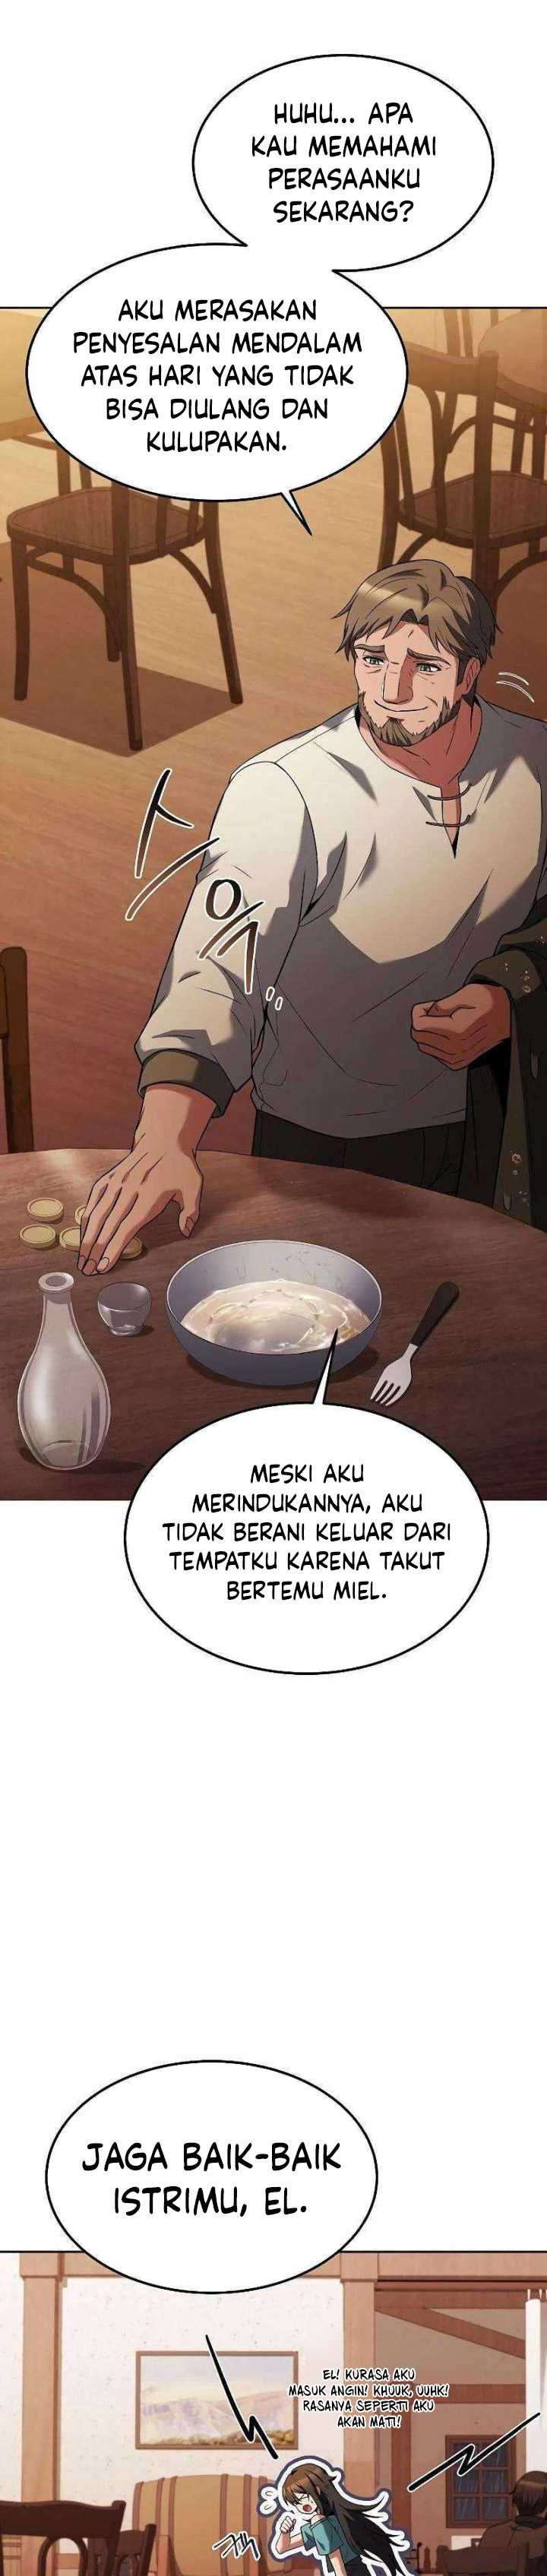 Archmage Restaurant Chapter 25